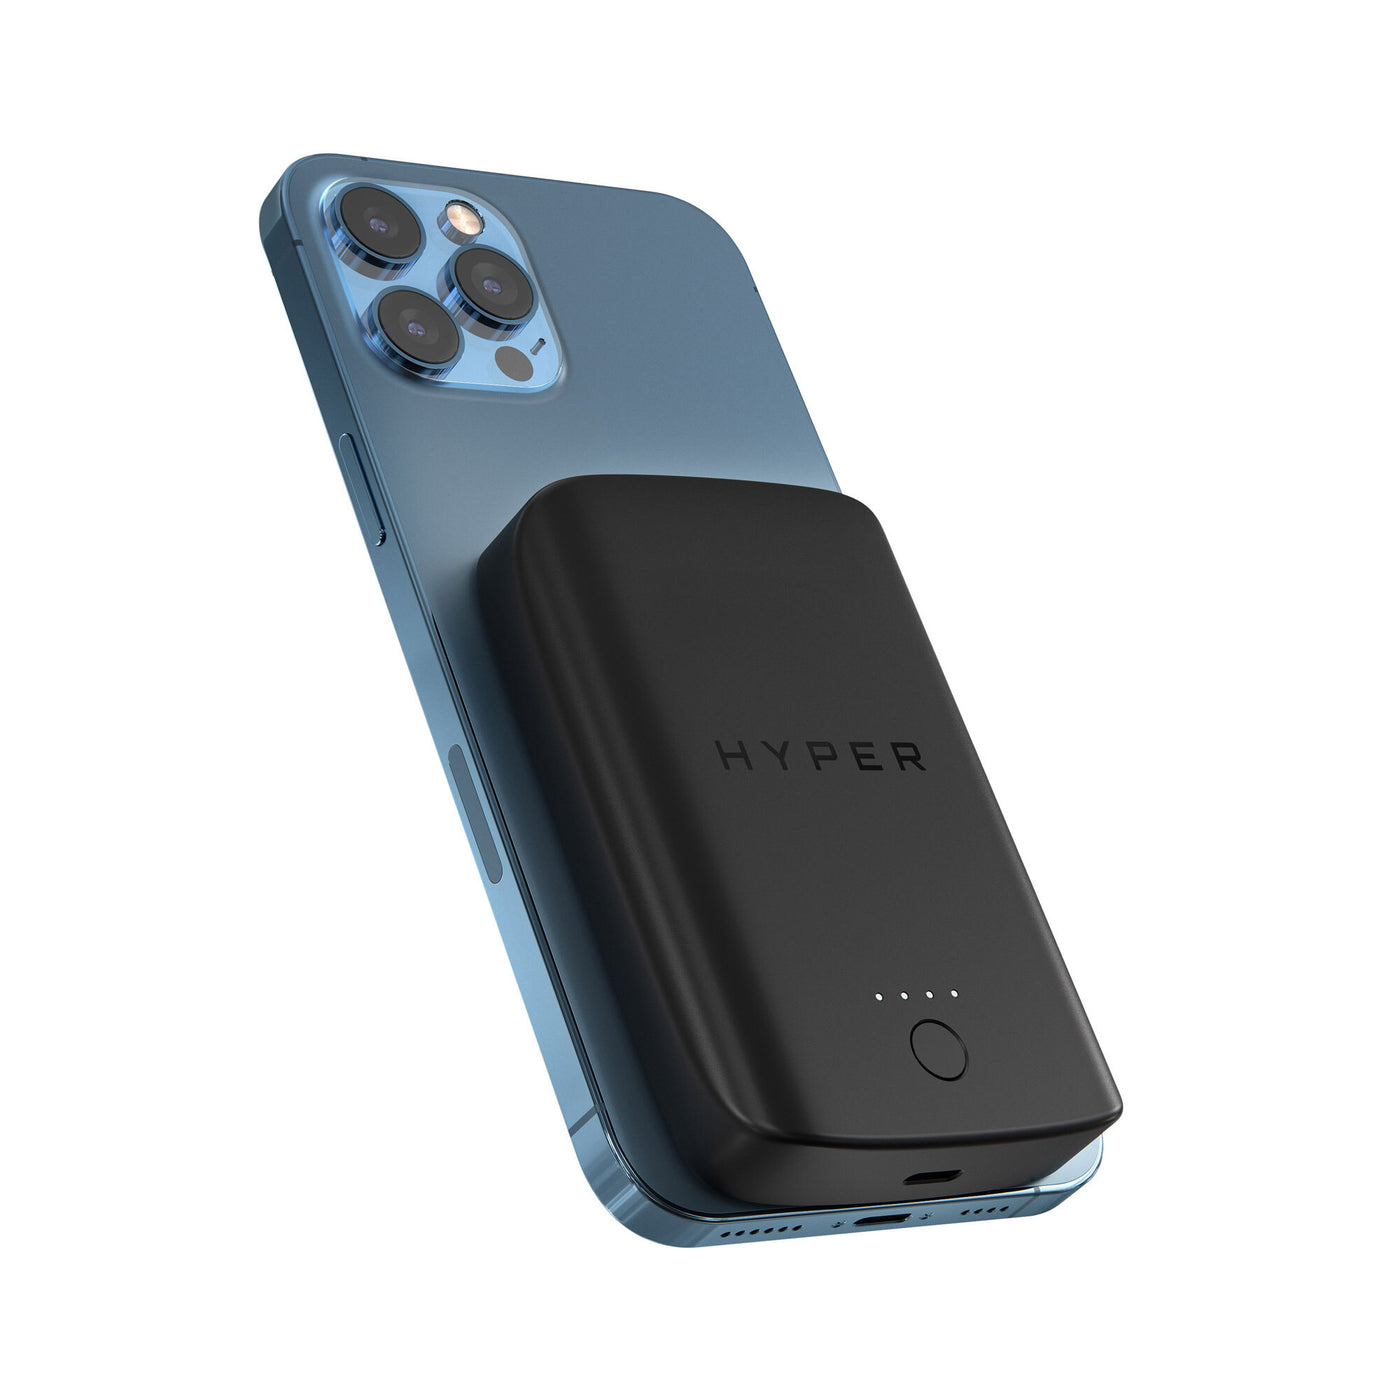 HYPER® Launches HyperJuice® Magnetic Wireless Battery Pack for all iPhone 12 models